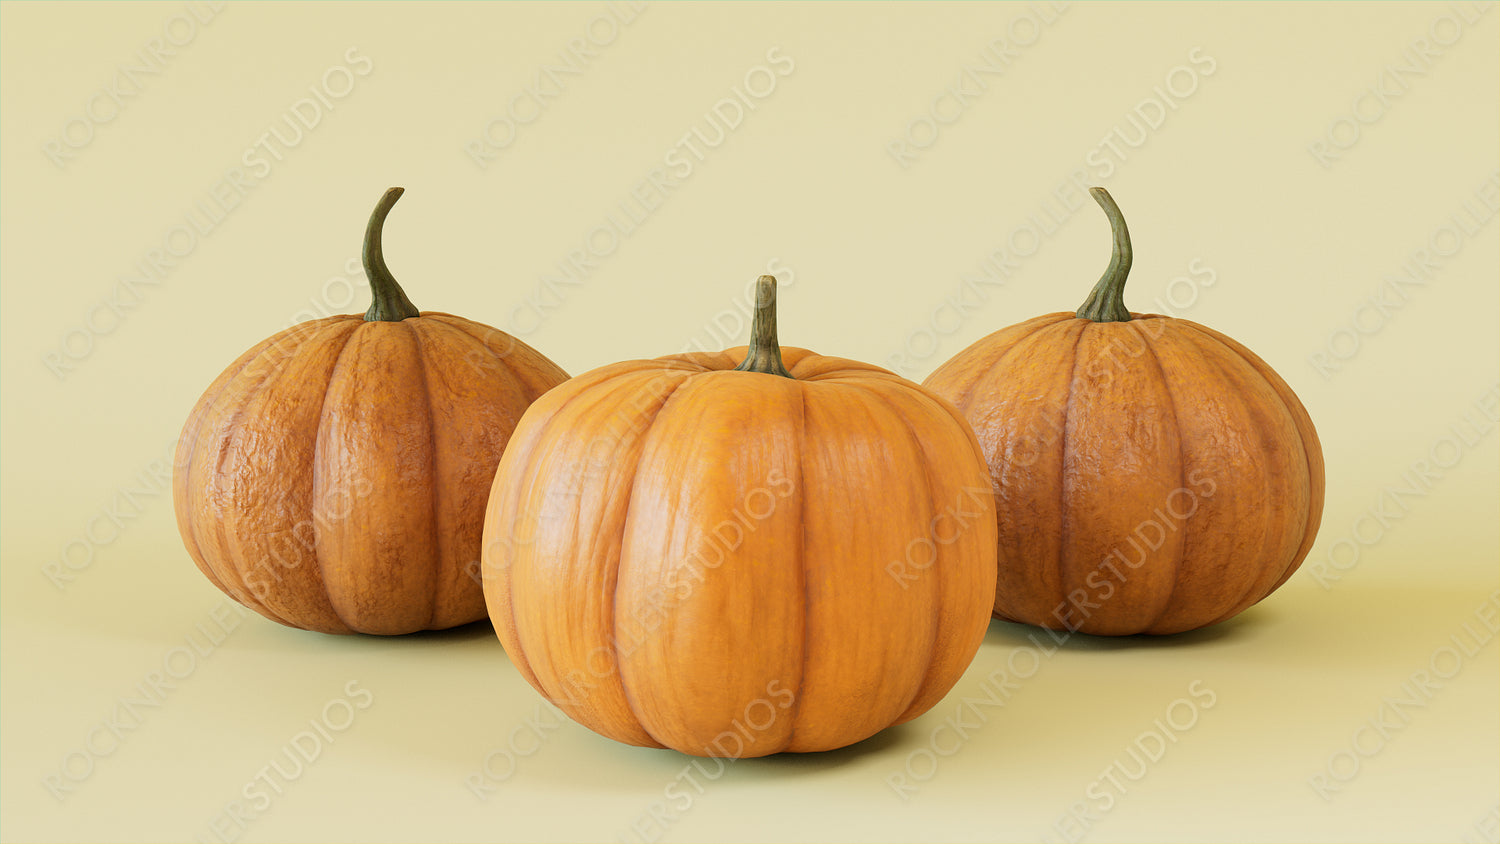 Seasonal background Image. Trio of Pumpkins on Pale Yellow color. Autumn Concept.